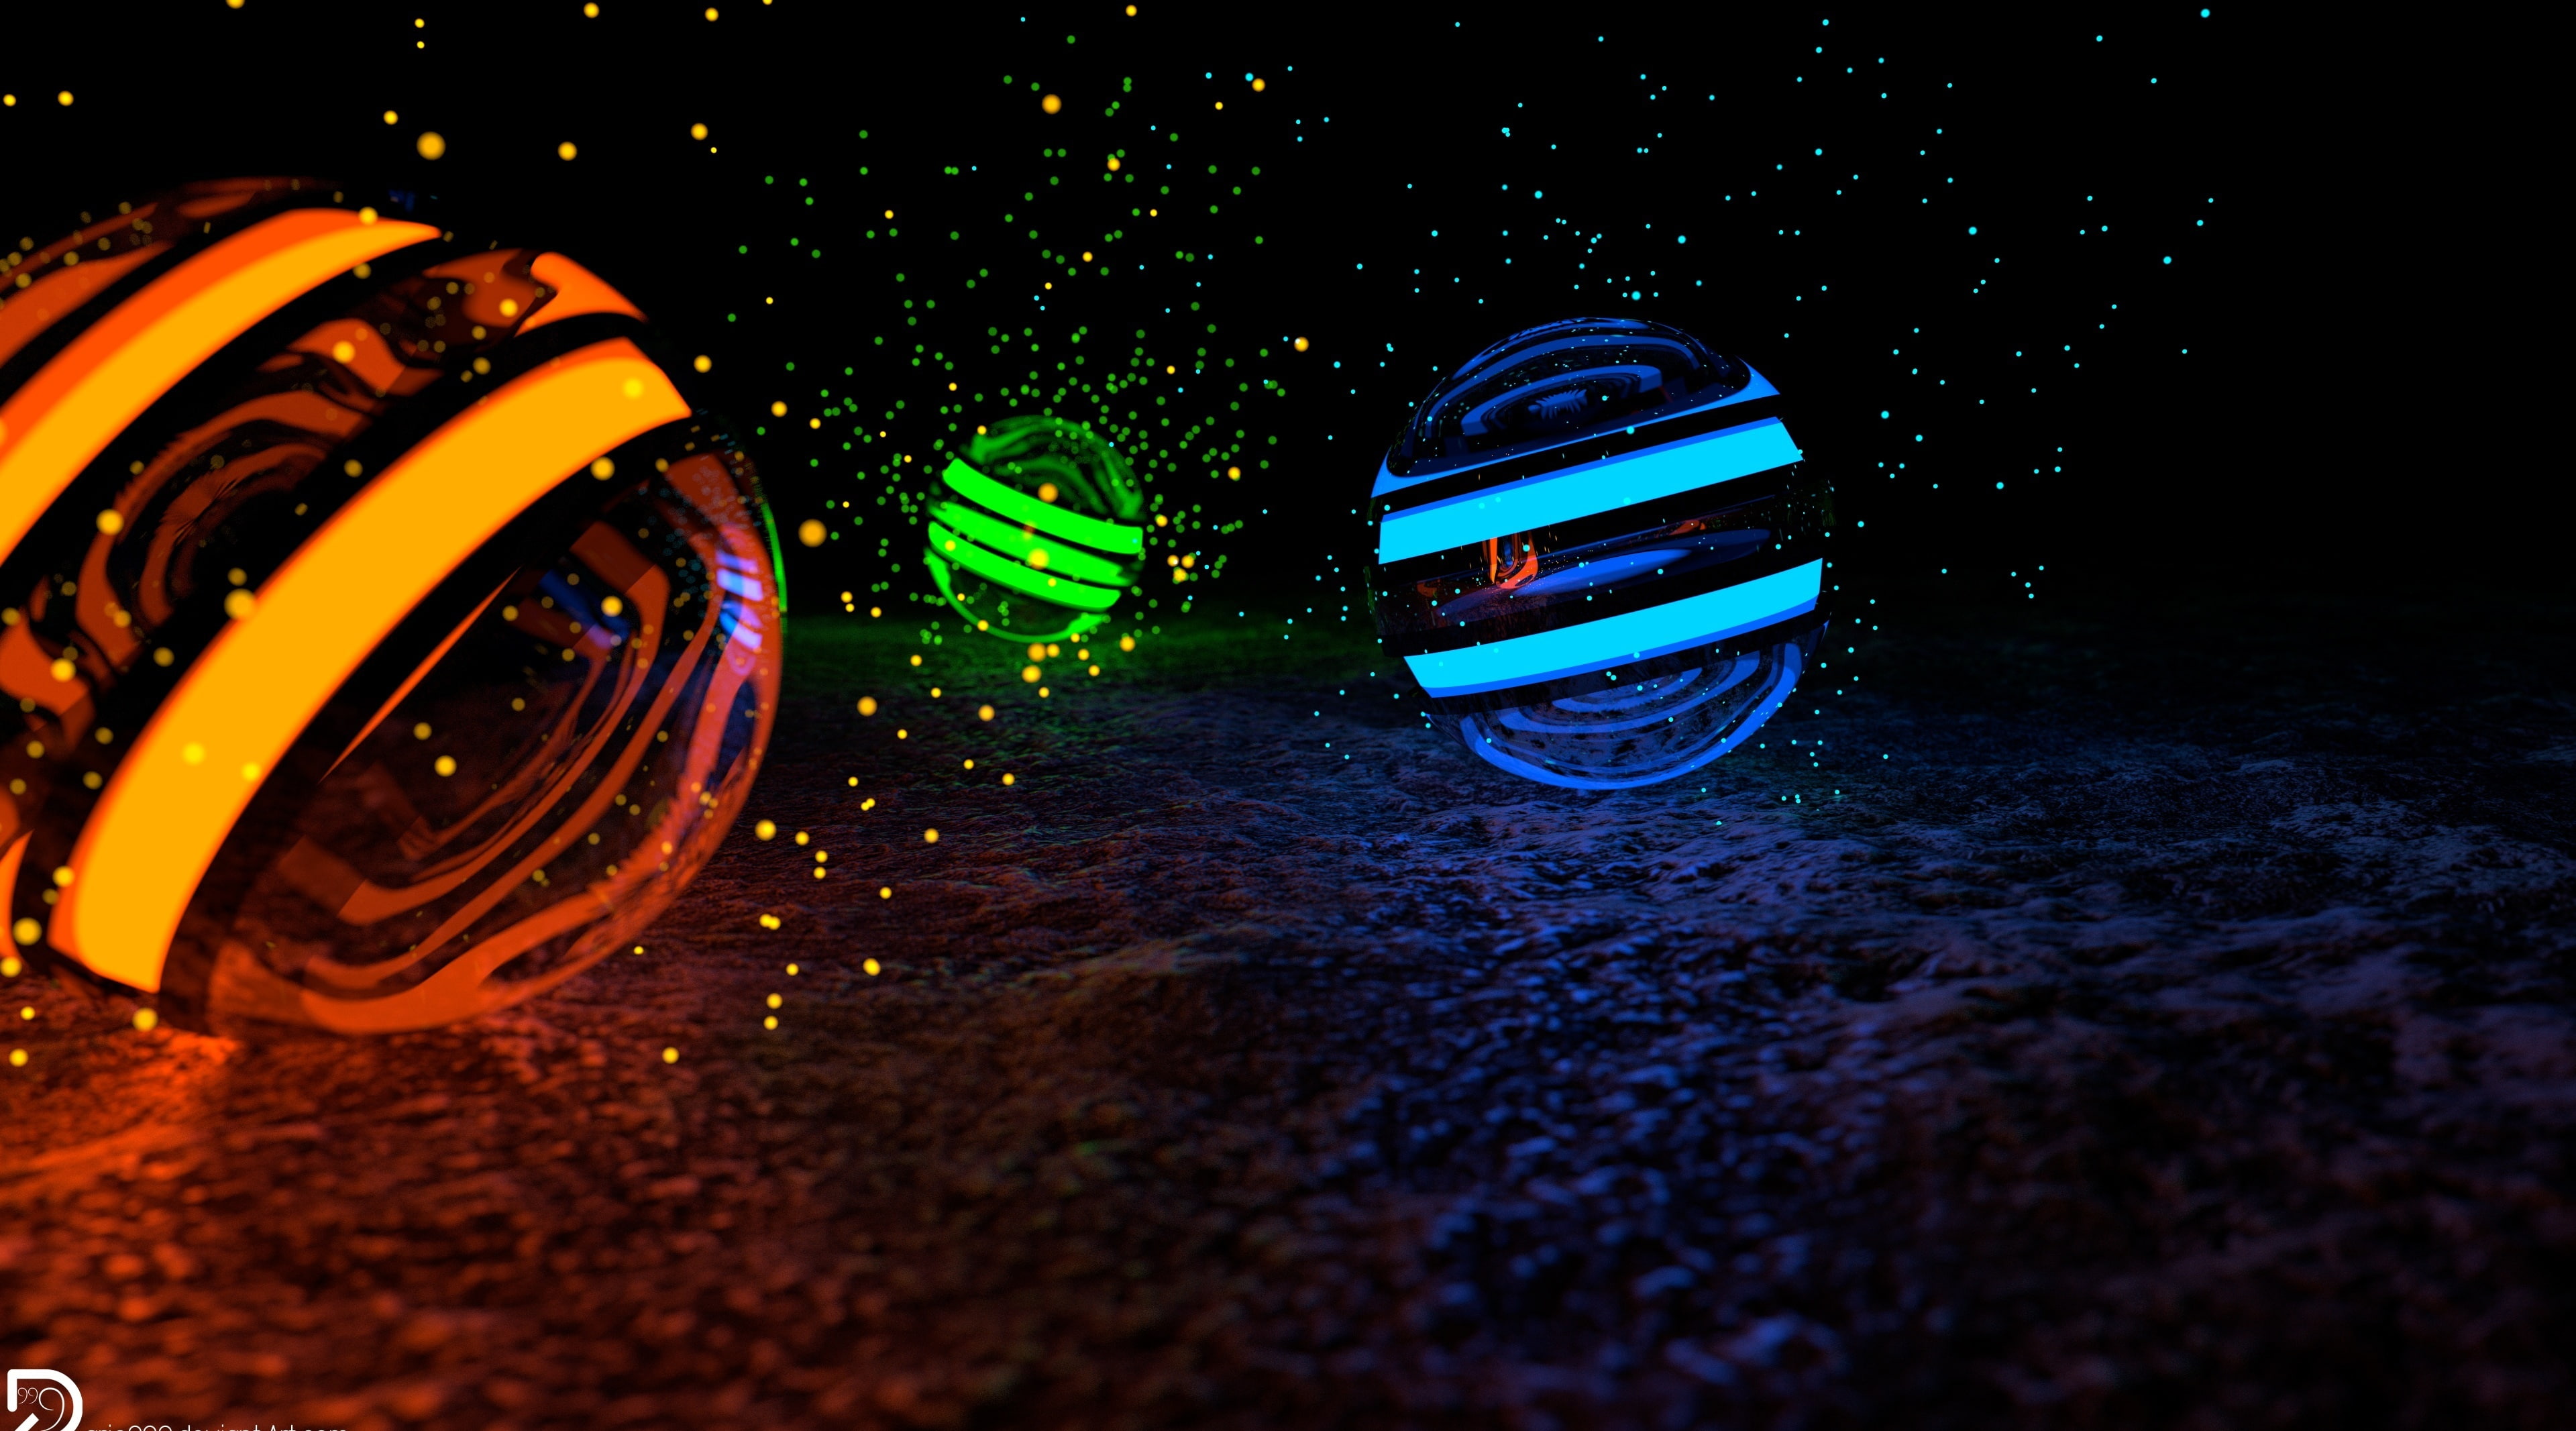 Spheres of Particles - 4K, multicolored wallpaper, Artistic, 3D